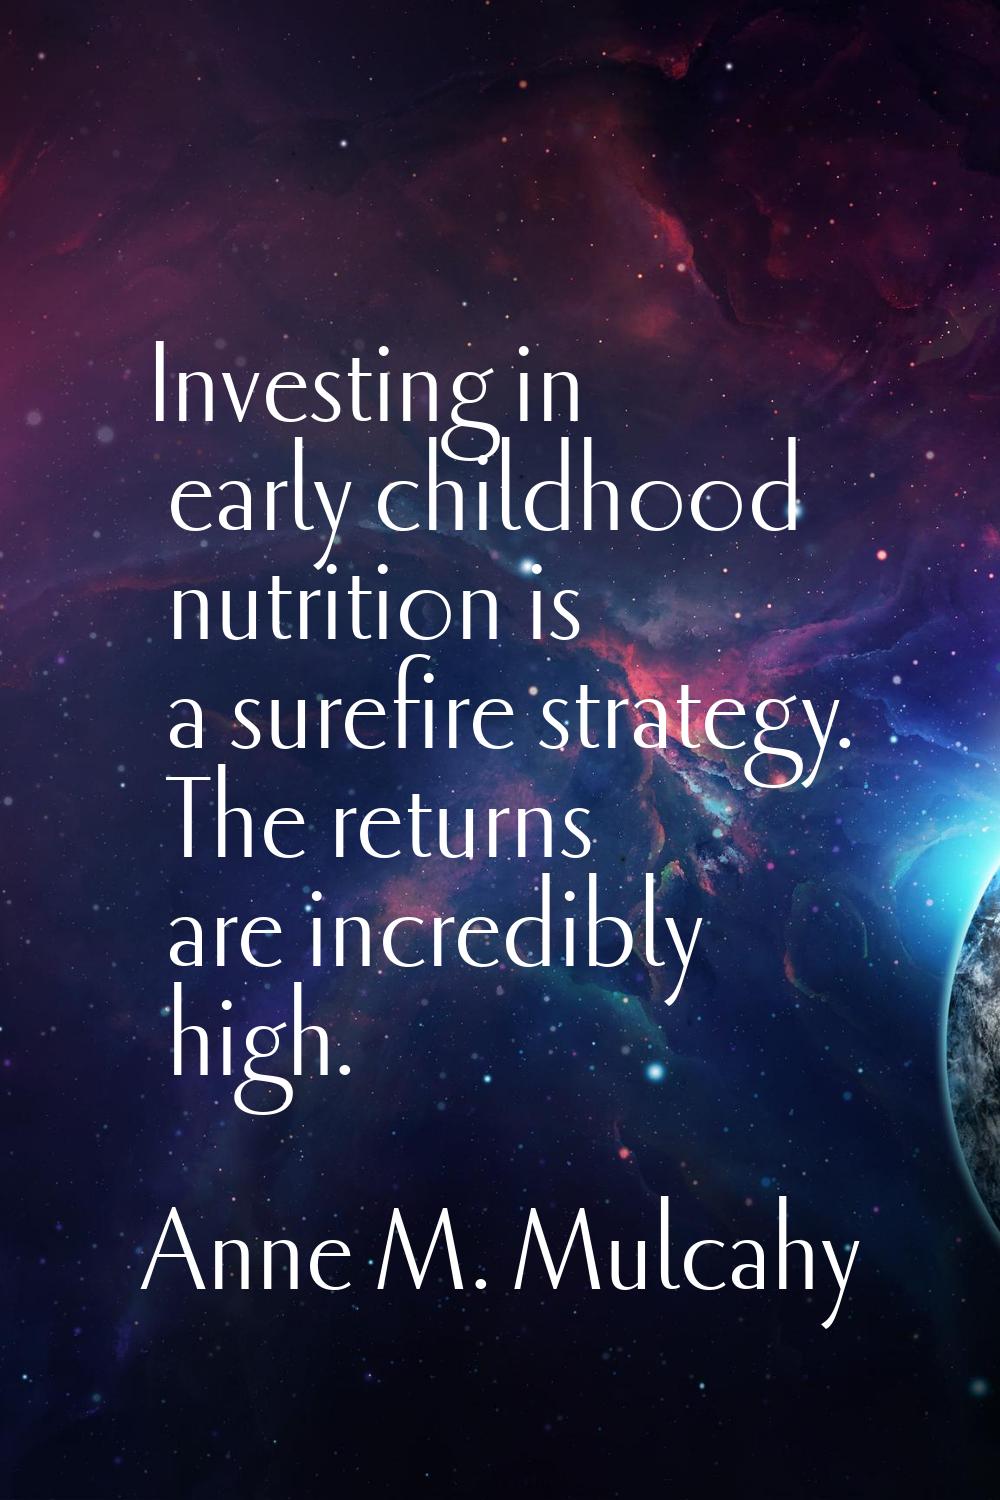 Investing in early childhood nutrition is a surefire strategy. The returns are incredibly high.